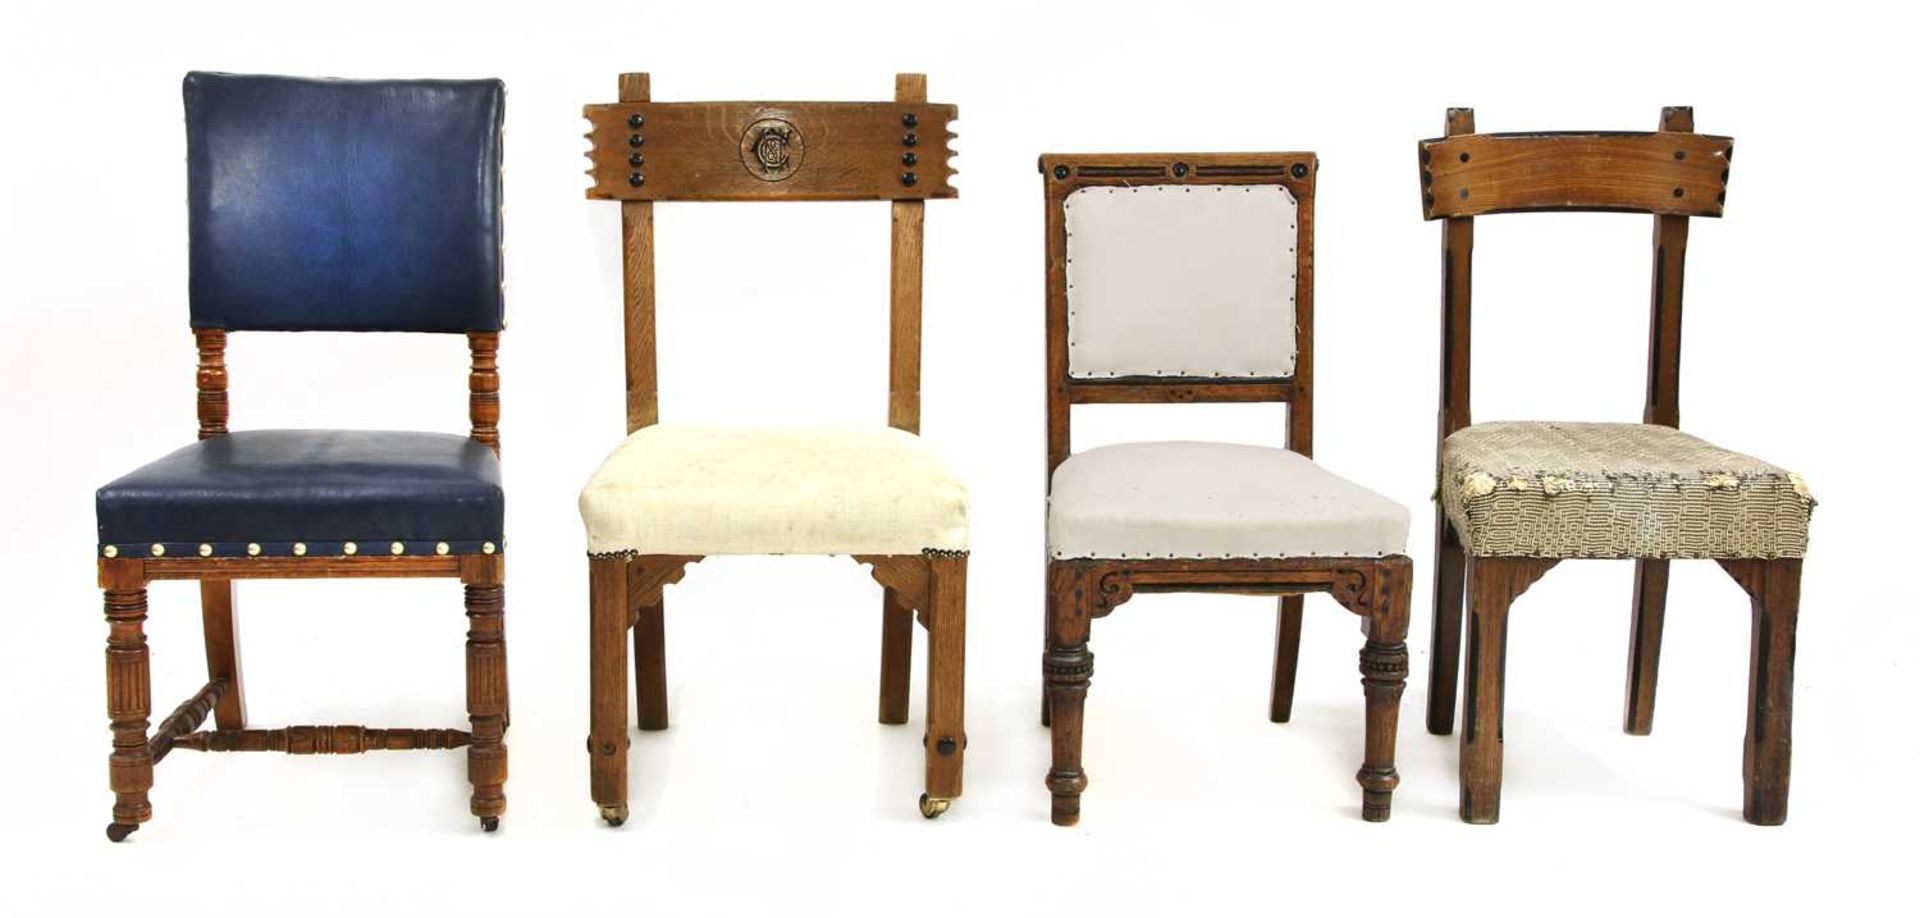 Four architect-designed chairs,